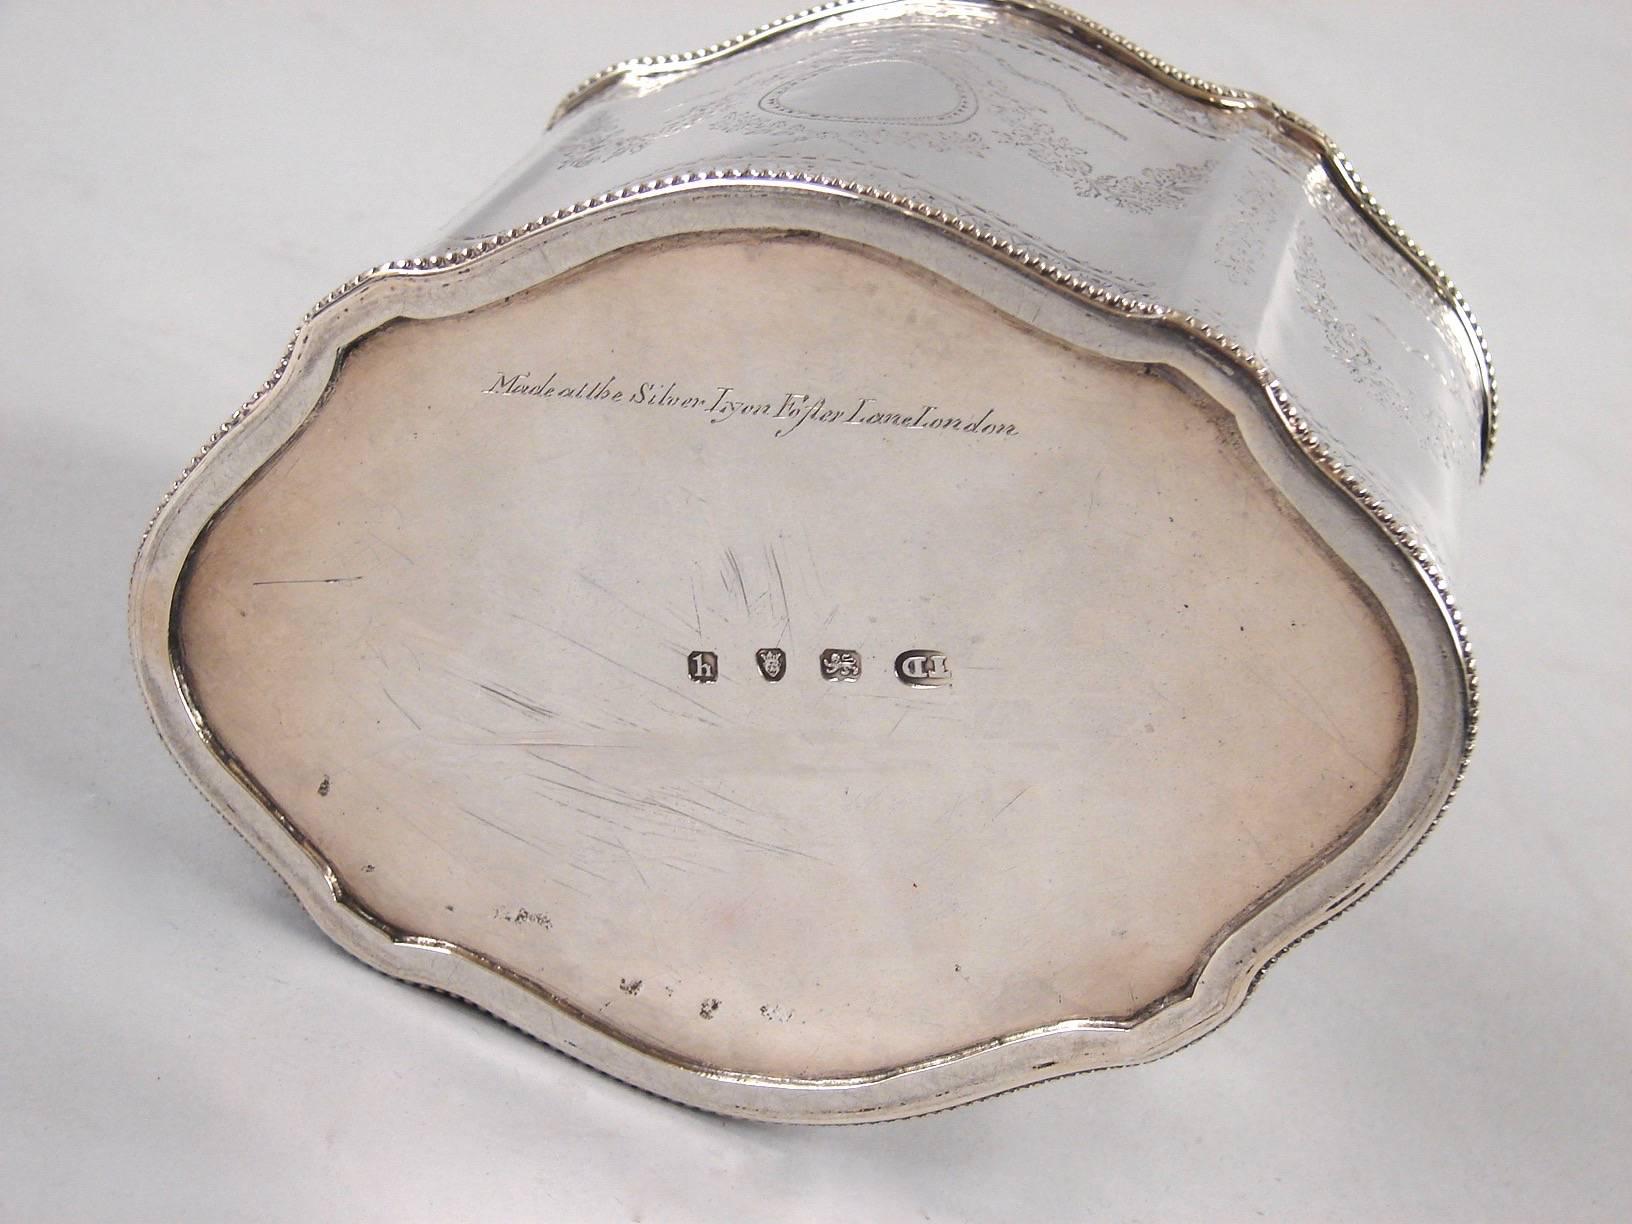 A fine English George III period sterling silver tea caddy of shaped oval form with bright cut decoration fully hallmarked for London 1783-4 by Thomas Daniell and signed in script 